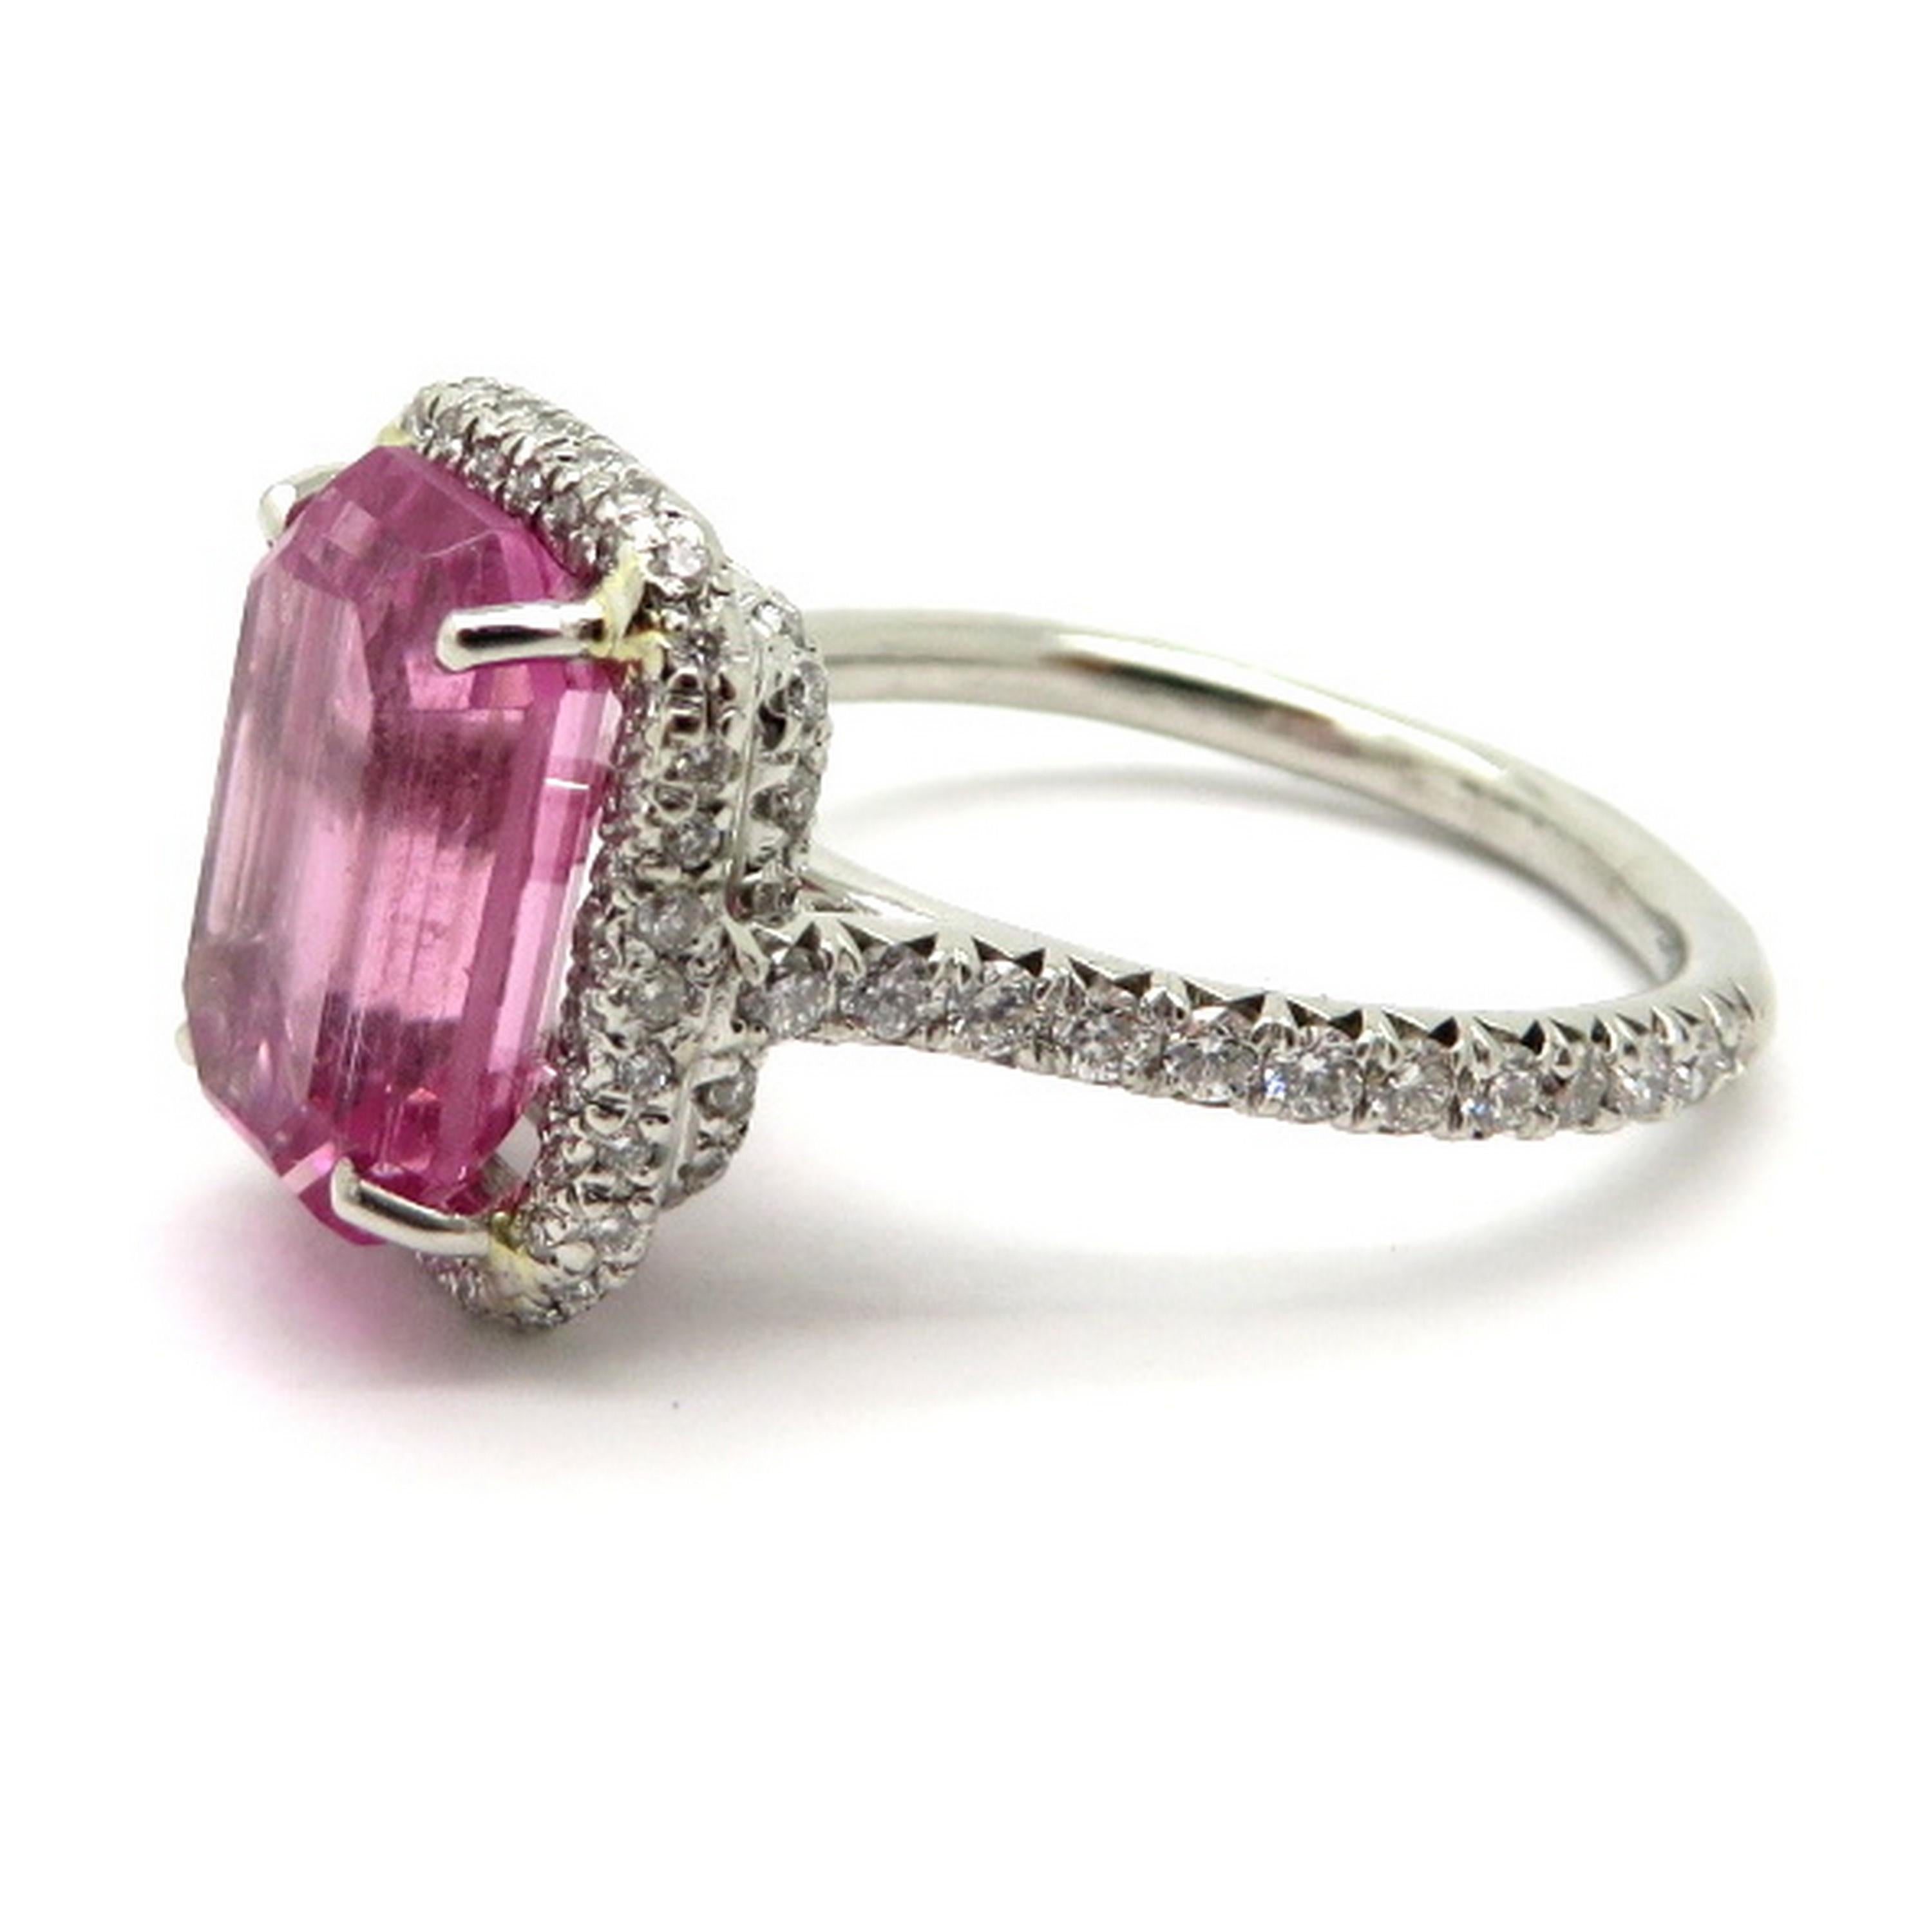 Estate platinum pink tourmaline and diamond fashion ring. Showcasing one fine quality emerald cut pink tourmaline, prong set, weighing approximately 4.26 carats. Accented with 86 round brilliant cut diamonds, bead set, weighing a combined total of